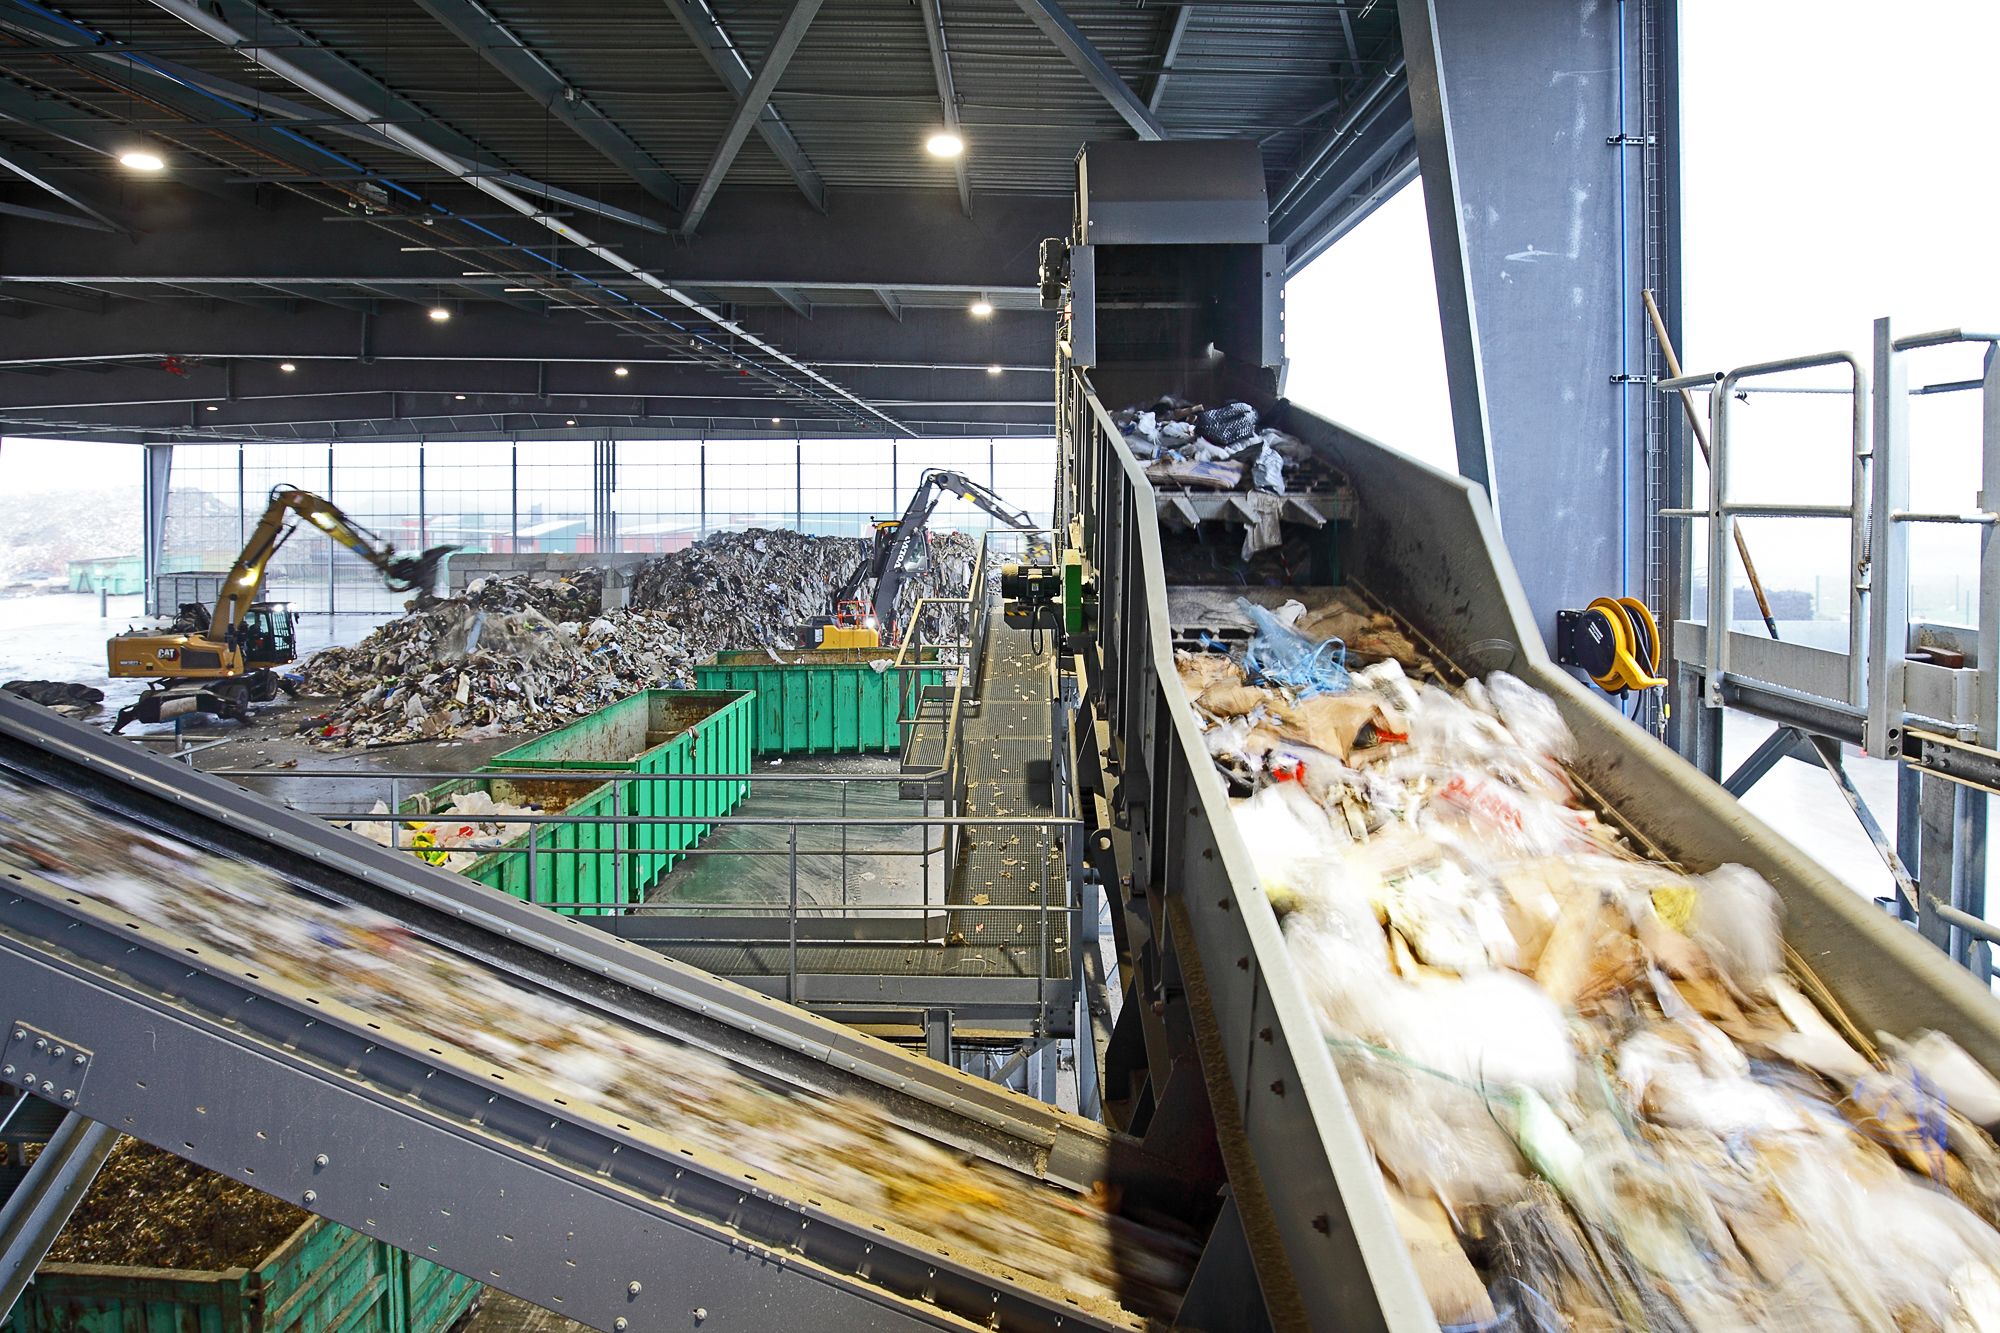 Aktid_News_Sud Vendée recyclage in pictures_3